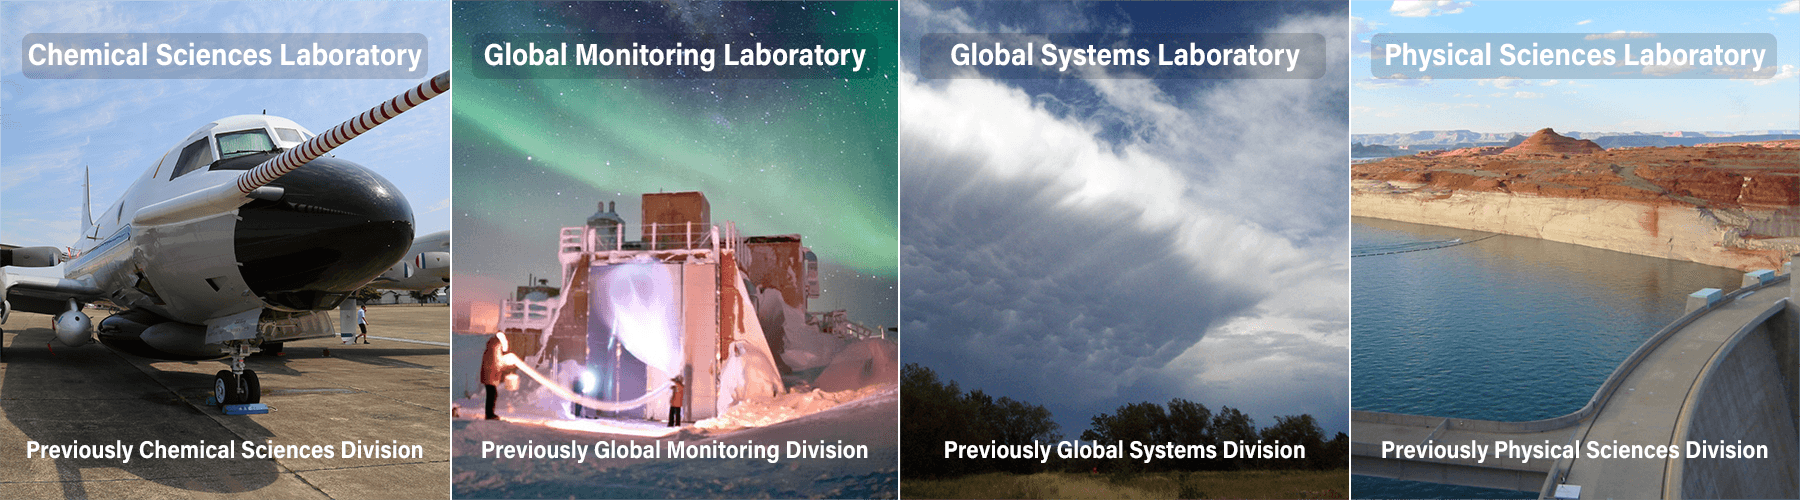 Chemical Sciences Division is now Chemical Sciences Laboratory; 	Global Monitoring Division is now Global Monitoring Laboratory; Global Systems Division is now Global Systems Laboratory;	Physical Sciences Division is now Physical Sciences Laboratory